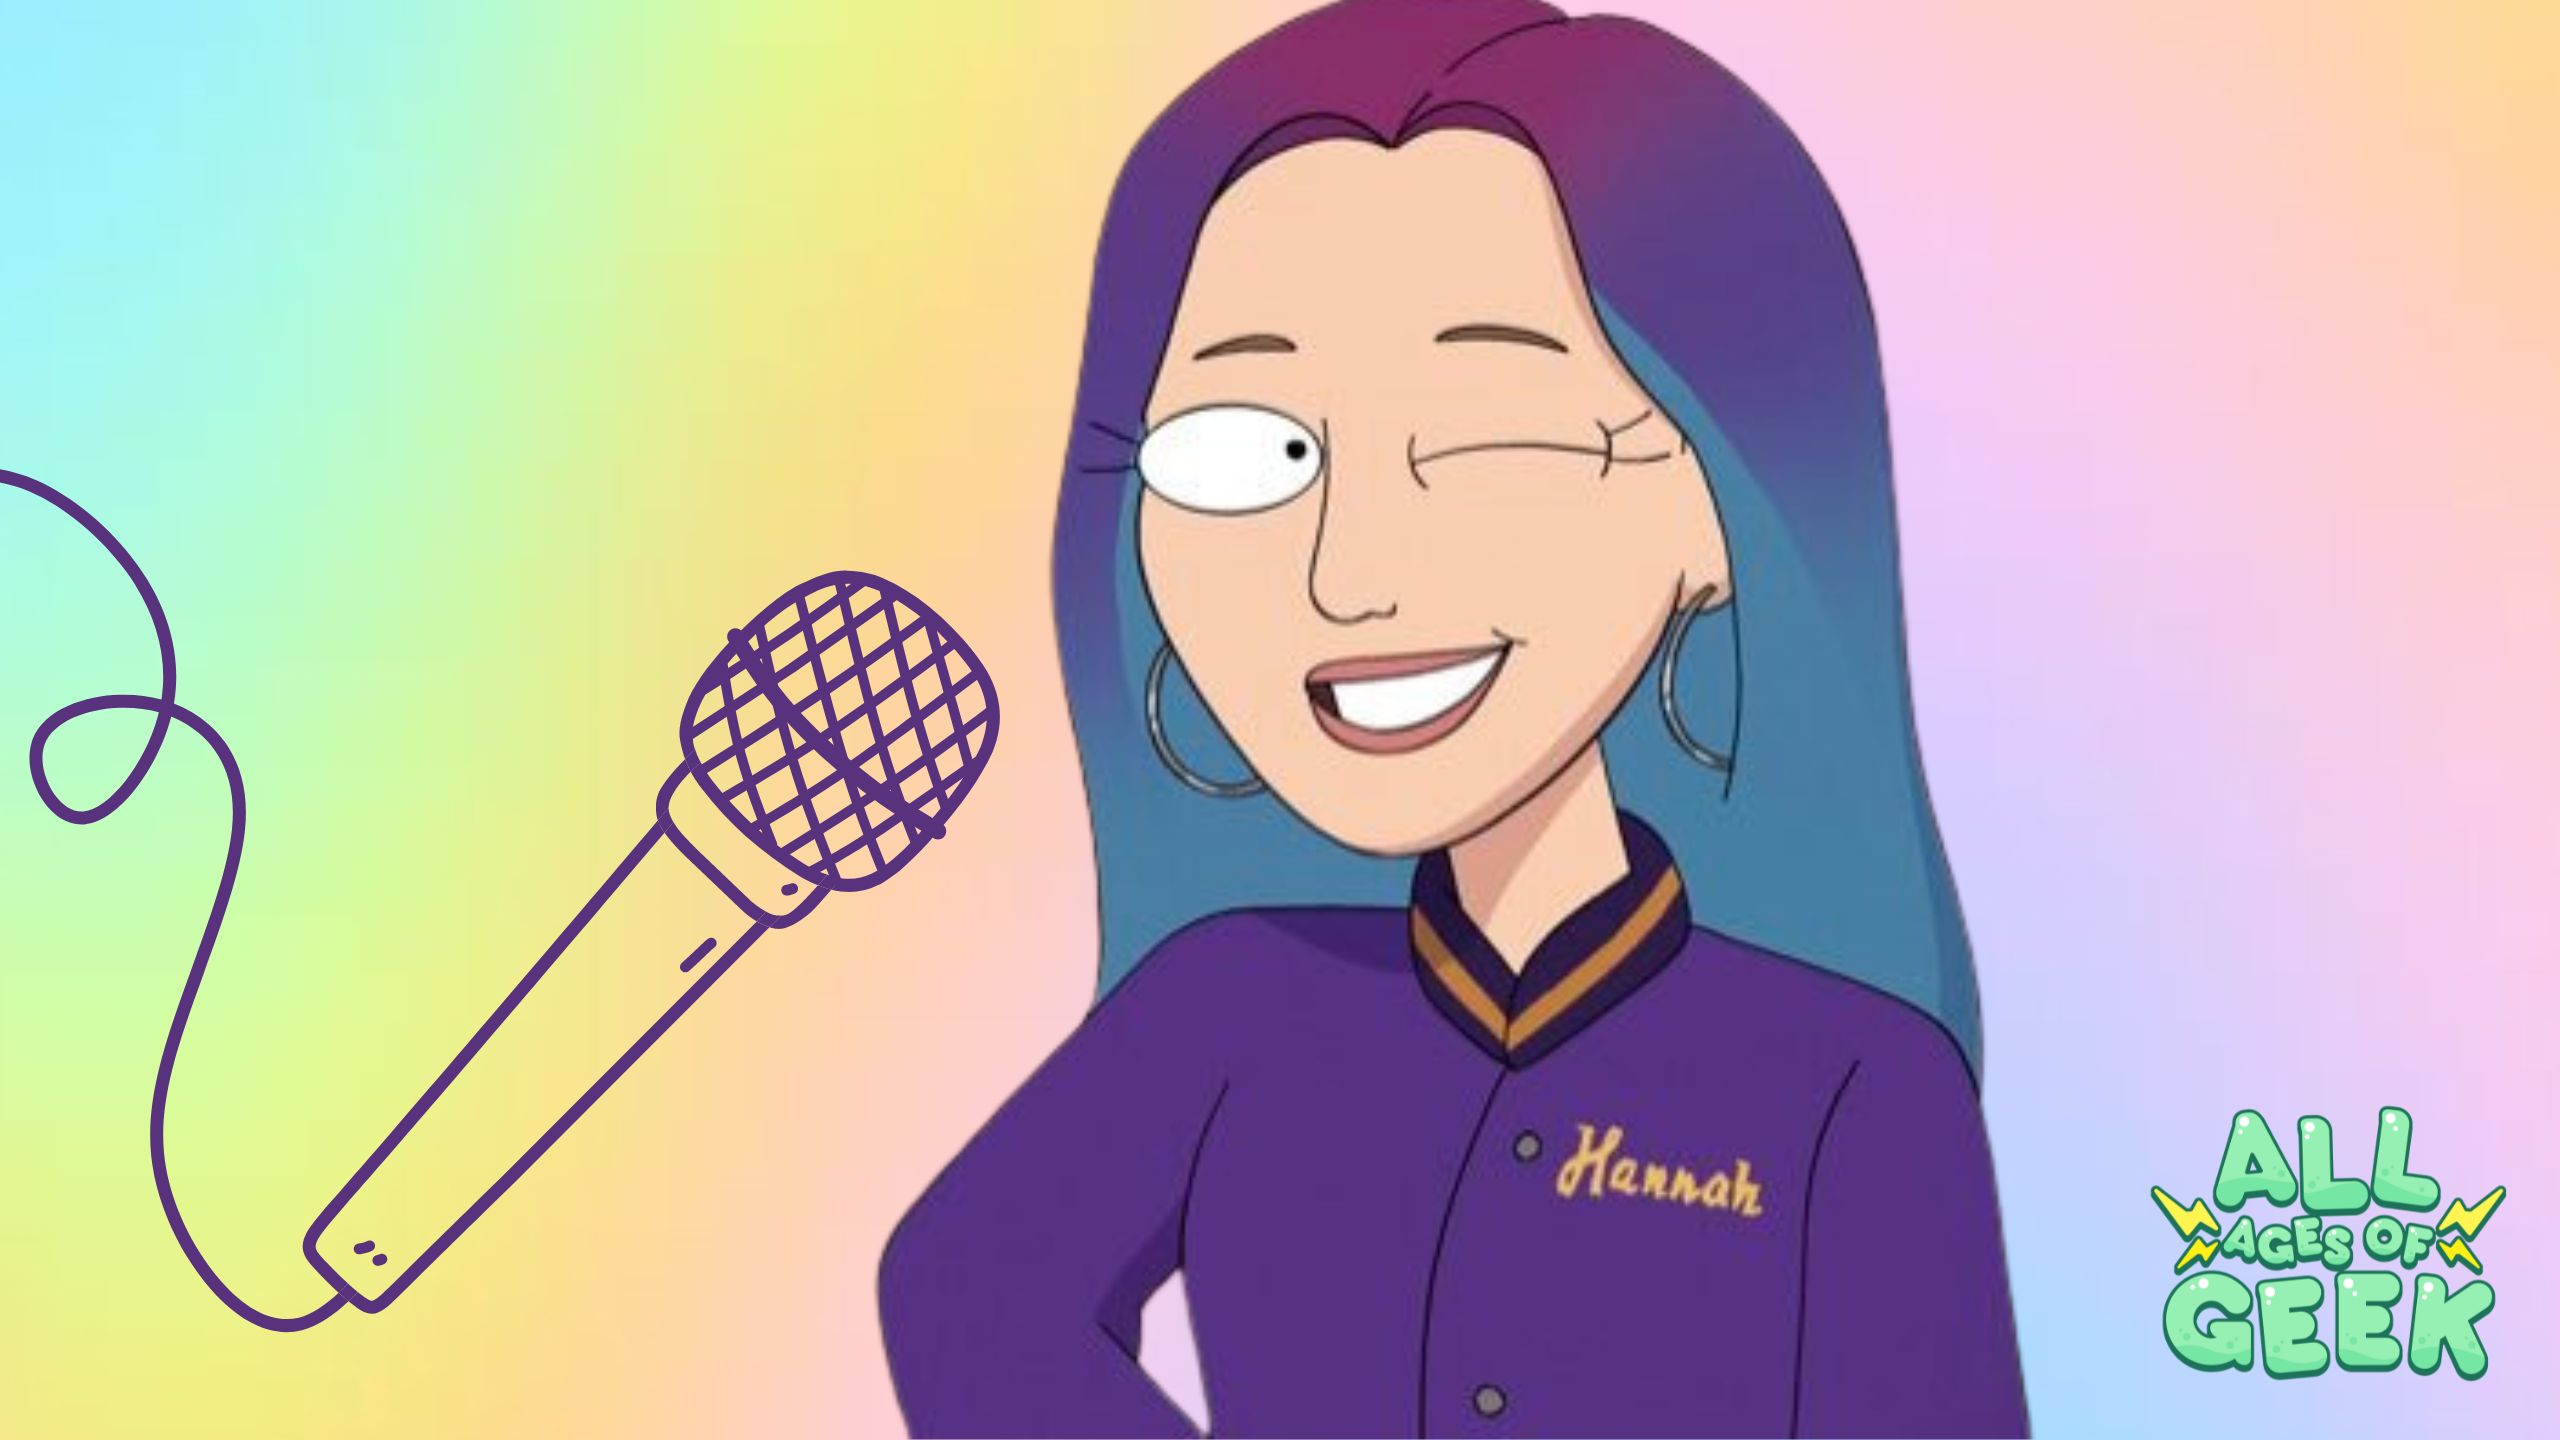 We Interviewed the Creator of “Bloody Latte Comics” Voice Actor & Director Hannah 4!